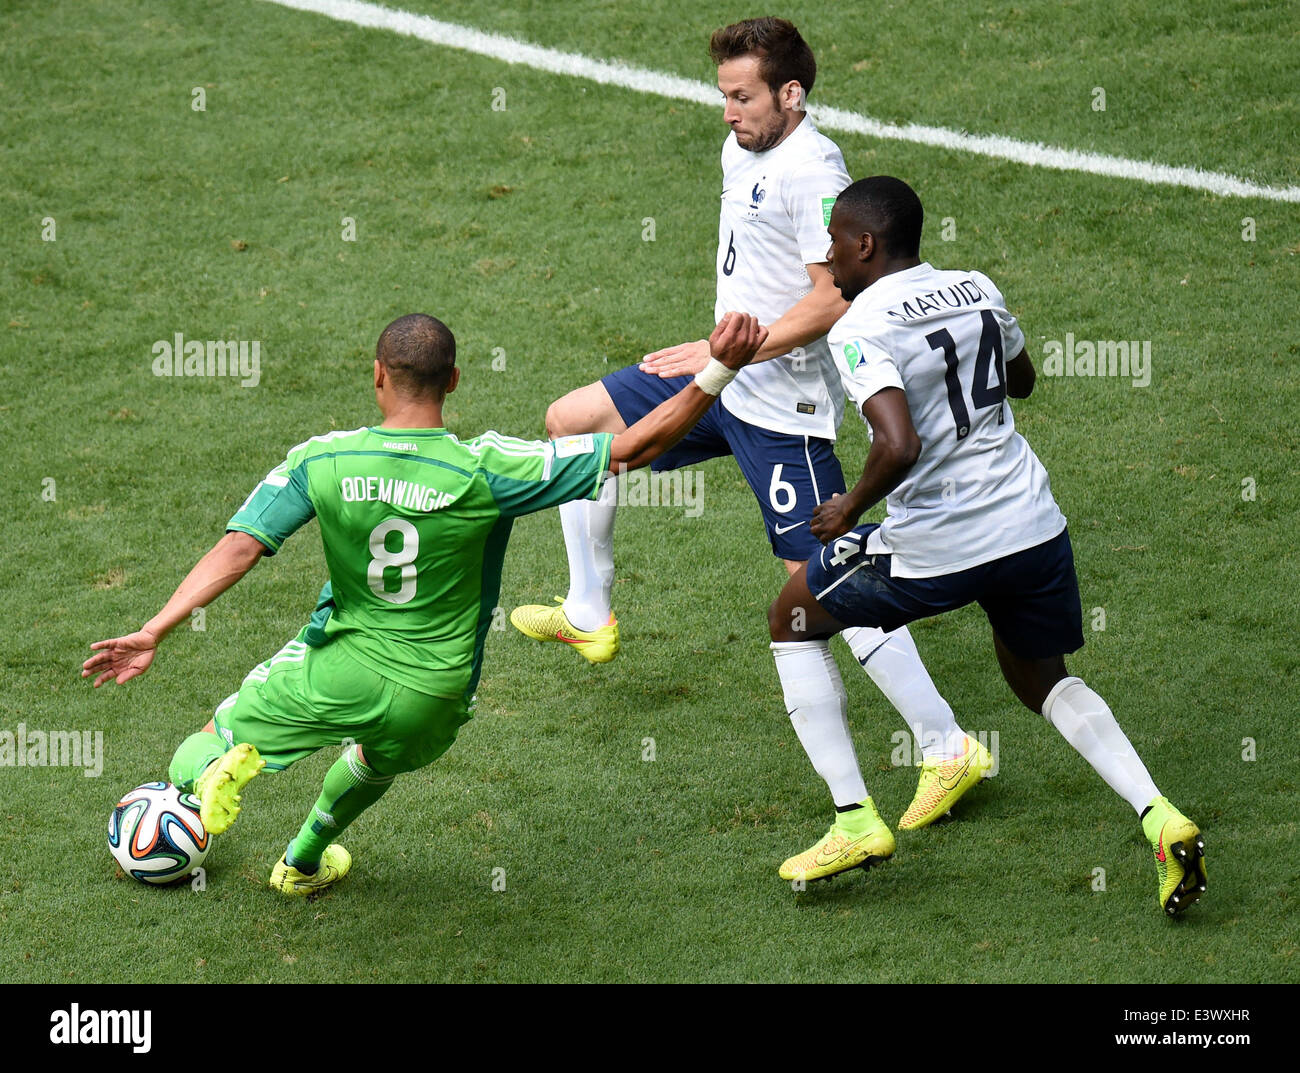 Brasilia, Brazil. 30th June, 2014. Nigeria's Peter Osaze Odemwingie (L) vies with the France's Blaise Matuidi (R) and Yohan Cabaye during a Round of 16 match between France and Nigeria of 2014 FIFA World Cup at the Estadio Nacional Stadium in Brasilia, Brazil, on June 30, 2014. France won 2-0 over Nigeria and qualified for Quarter-finals here on Monday. Credit:  Liu Dawei/Xinhua/Alamy Live News Stock Photo